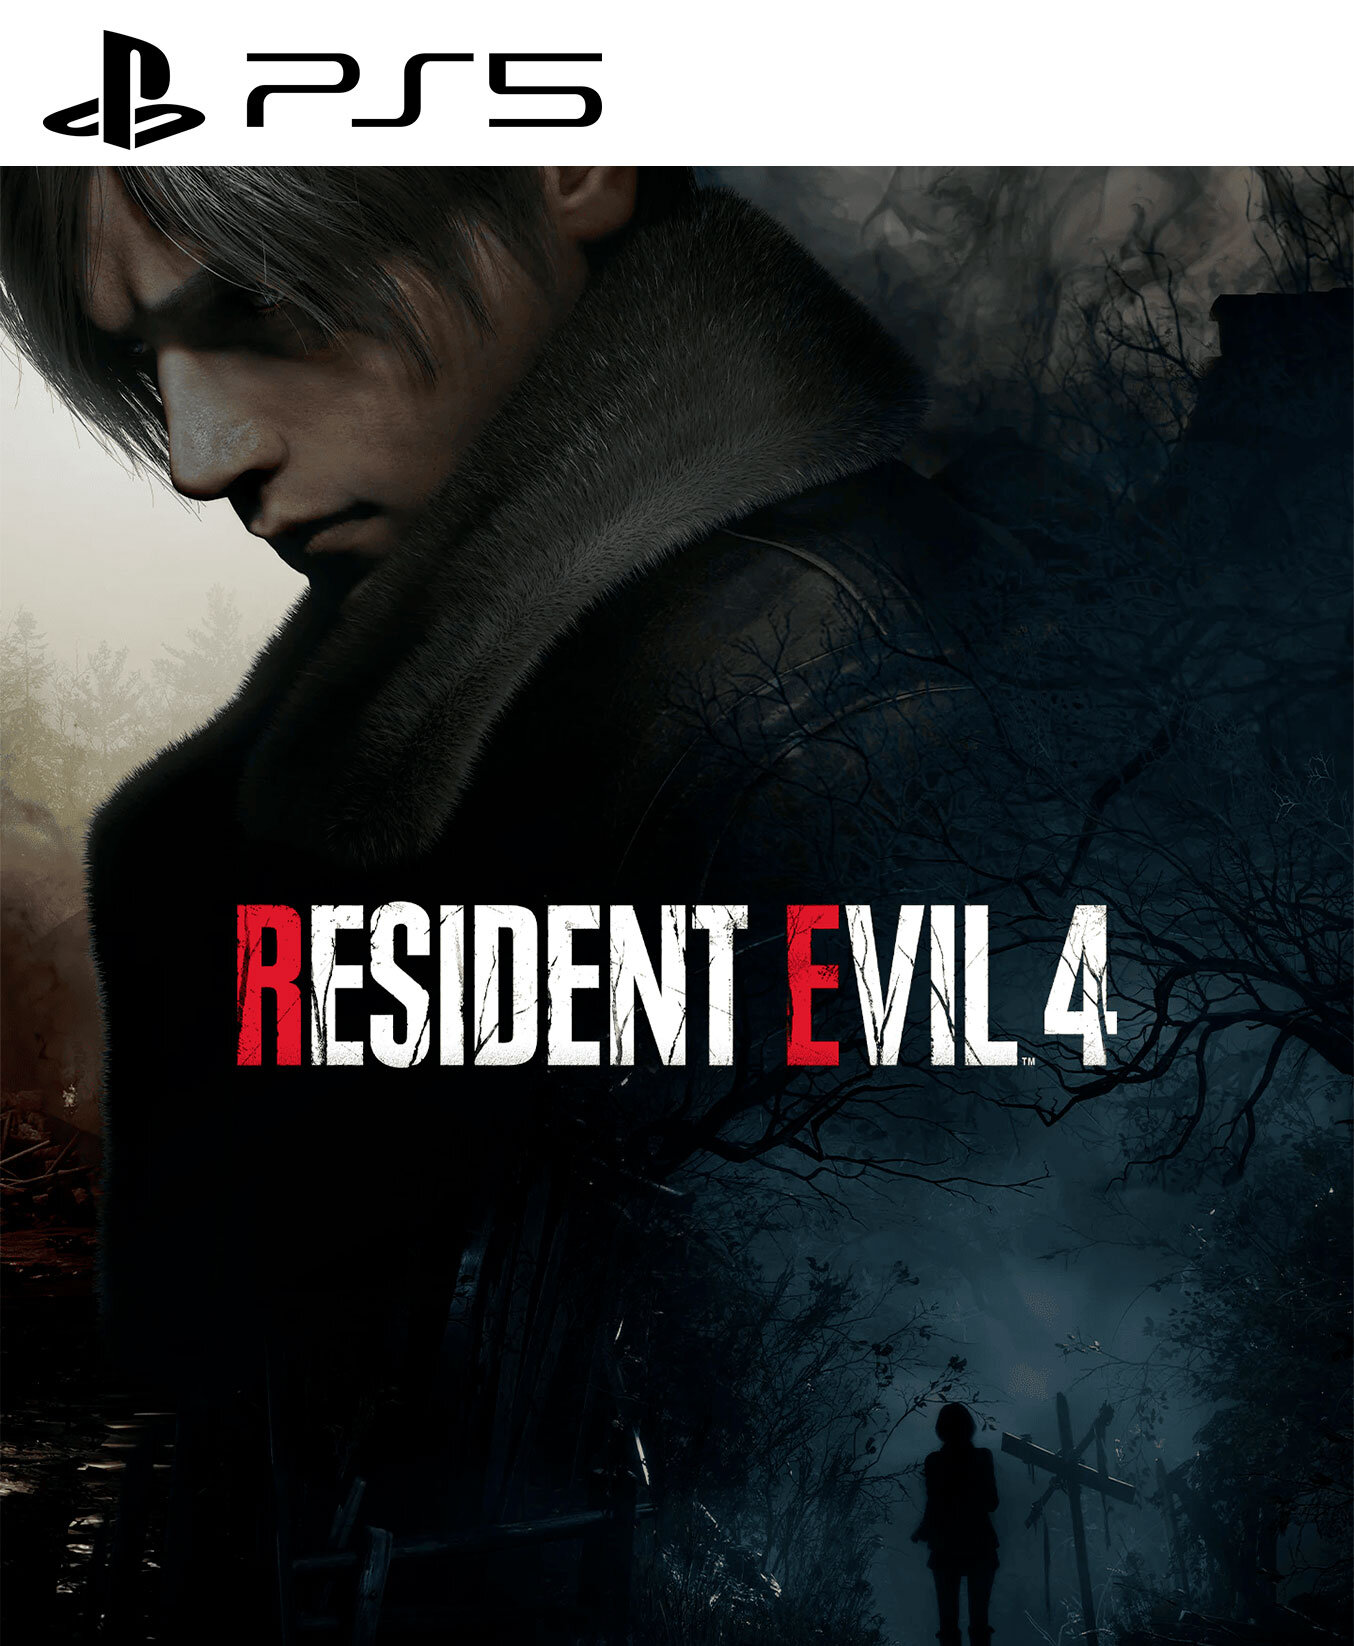 Resident Evil 4 Remake PS5, Juegos Digitales Chile